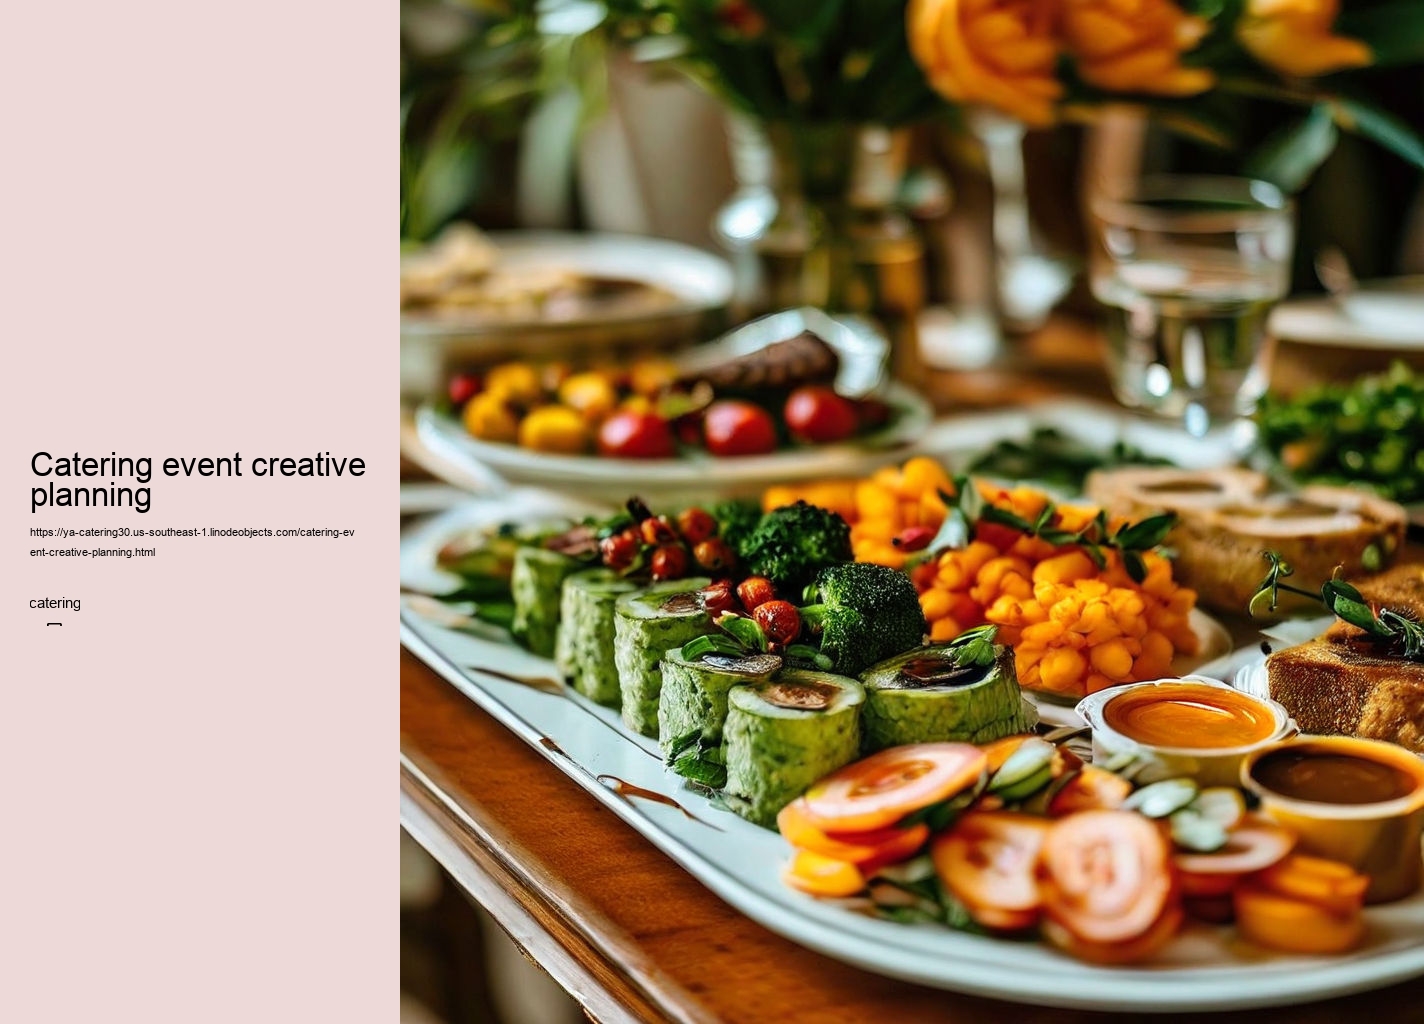 Catering event creative planning